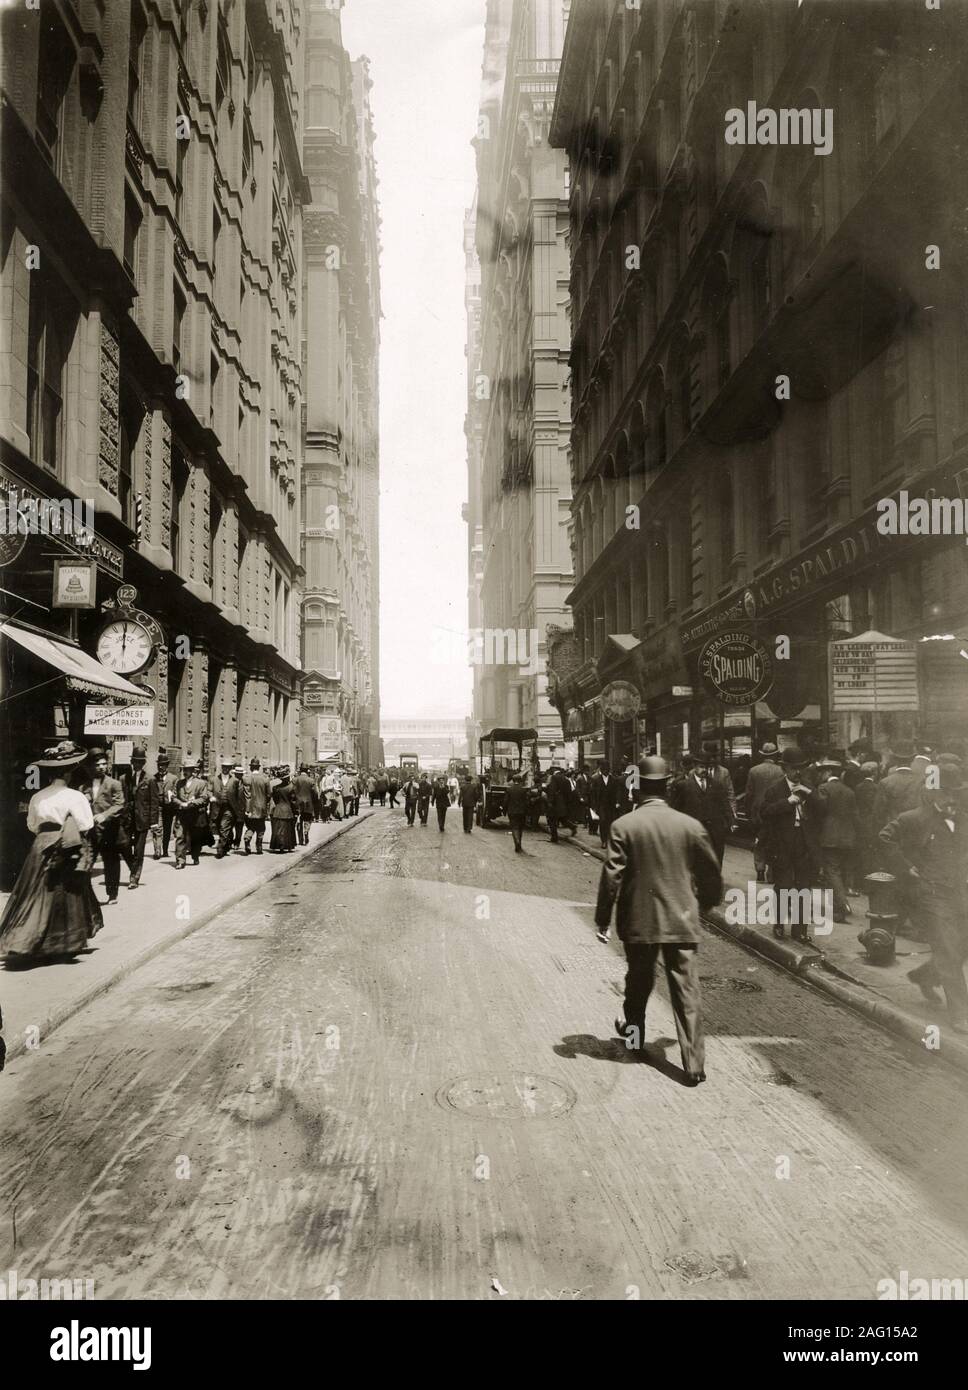 Early 20th century vintage press photograph - street scene in New York Stock Photo